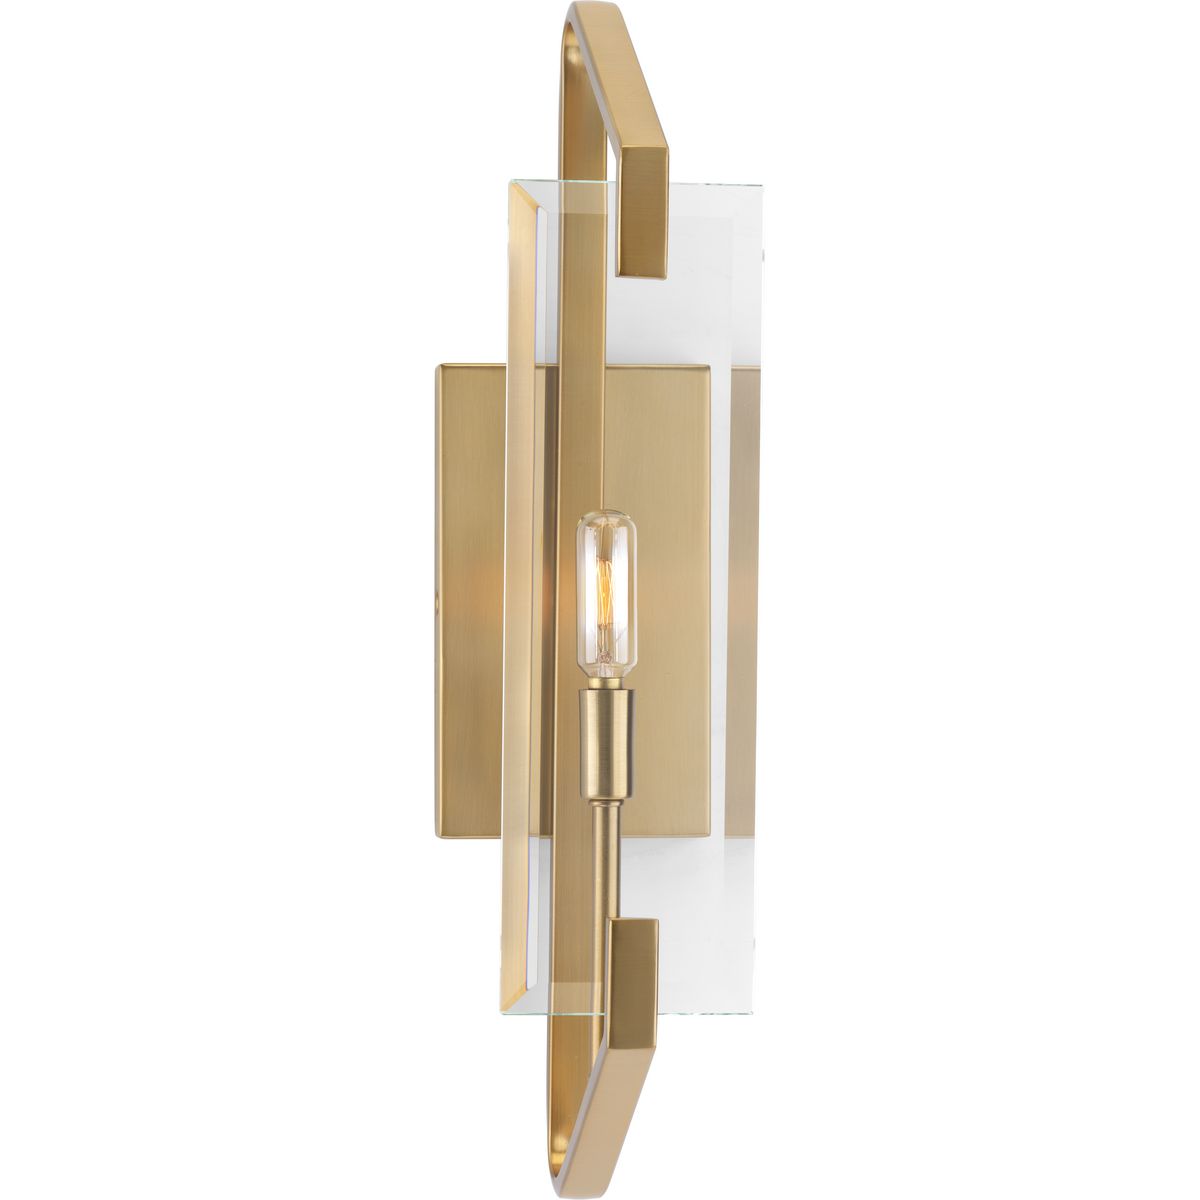 A stylish Brushed Bronze finish frames brilliant clear beveled glass panels in the Cahill collection one-light wall sconce-bath bracket. Ideal for luxe or mid-century modern interiors, the visual interest provides a reinvention of the popular glass design.